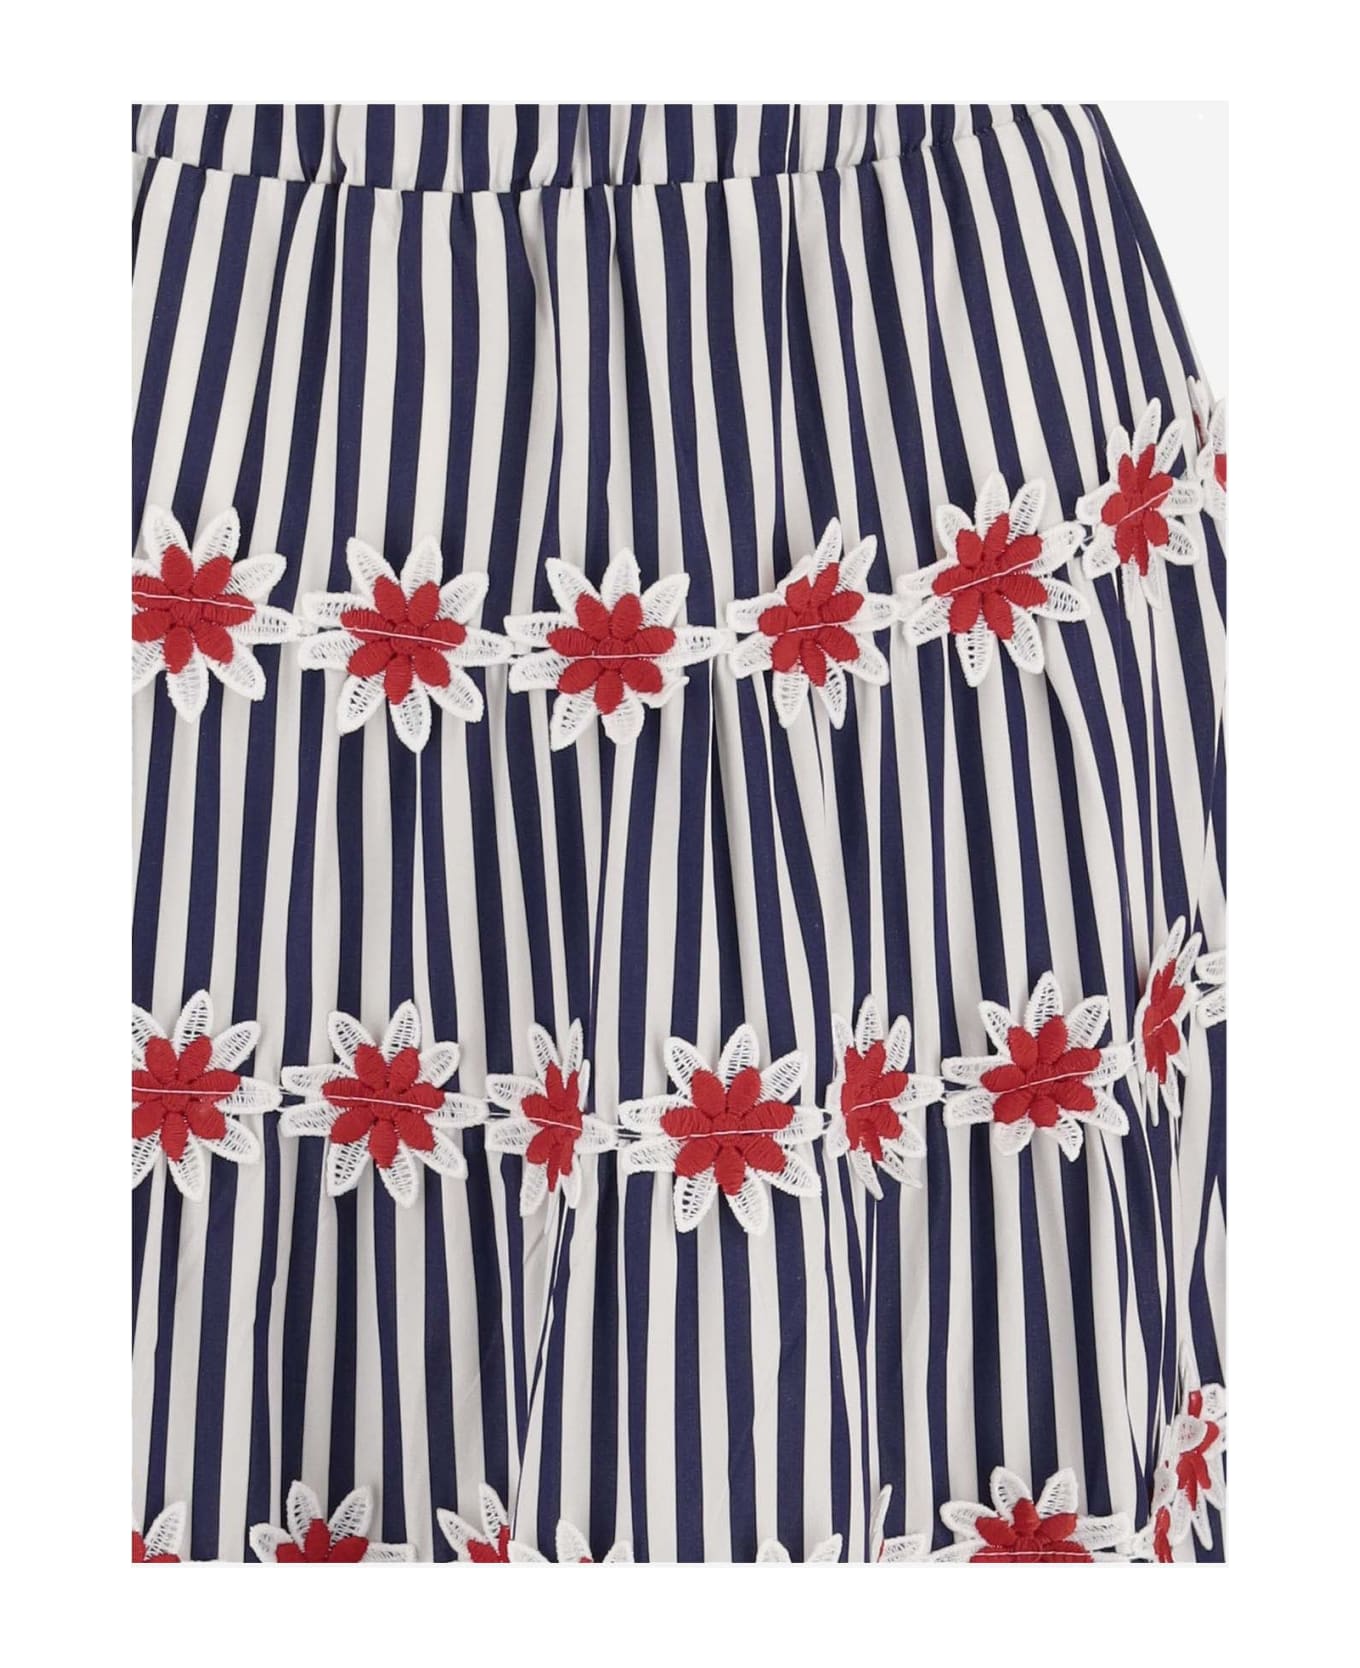 Flora Sardalos Cotton Skirt With Striped Pattern - Red スカート